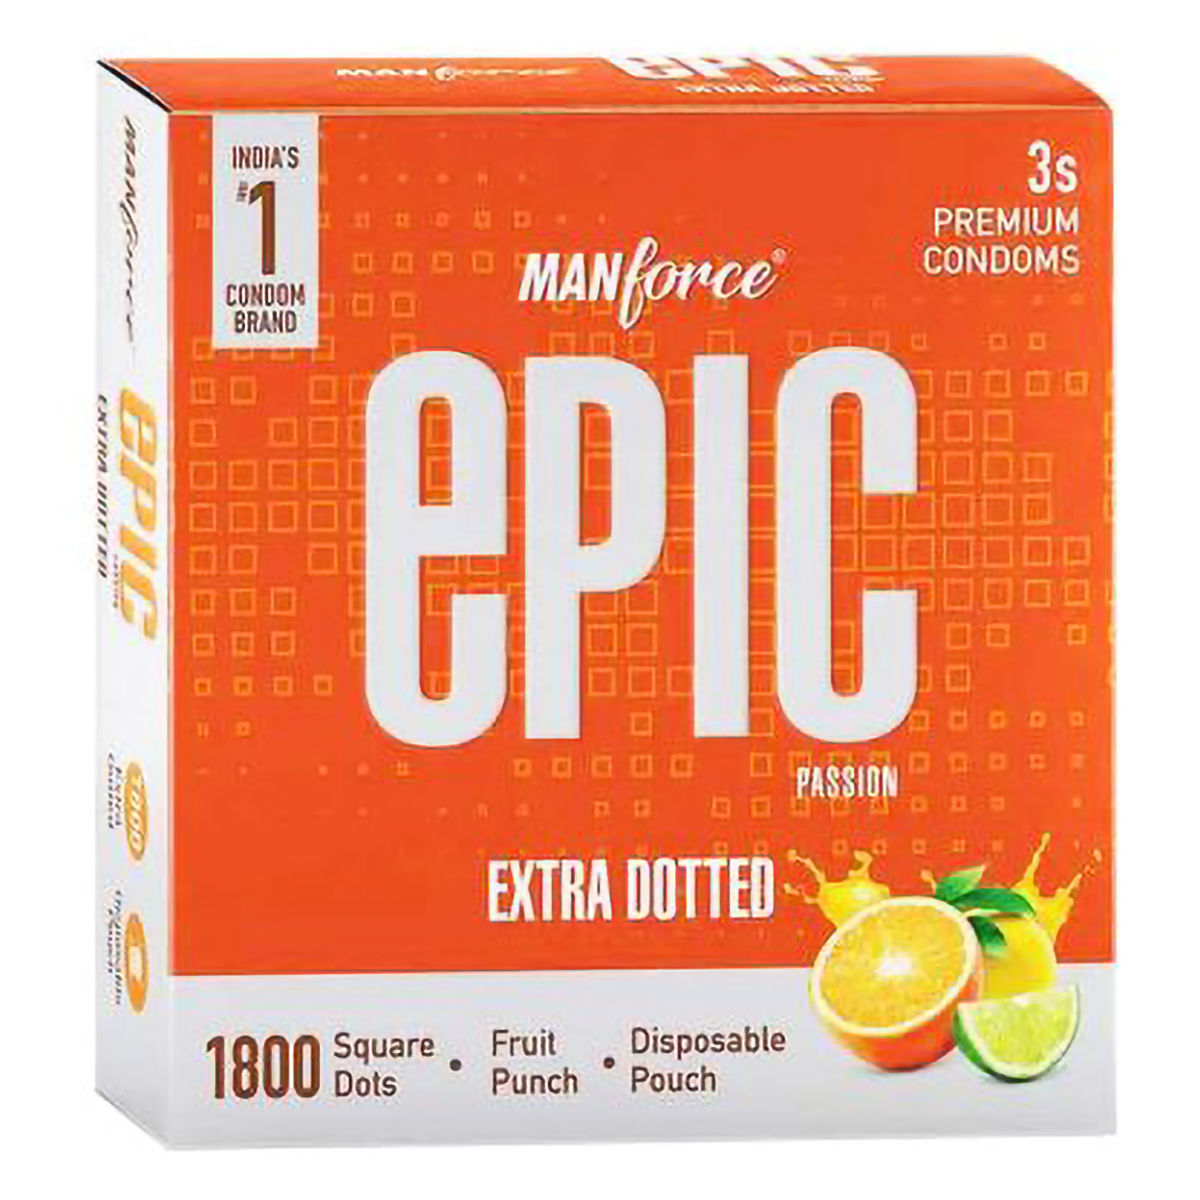 Manforce Epic Passion Extra Dotted Fruit Punch Flavour Condoms, 3 Count, Pack of 1 